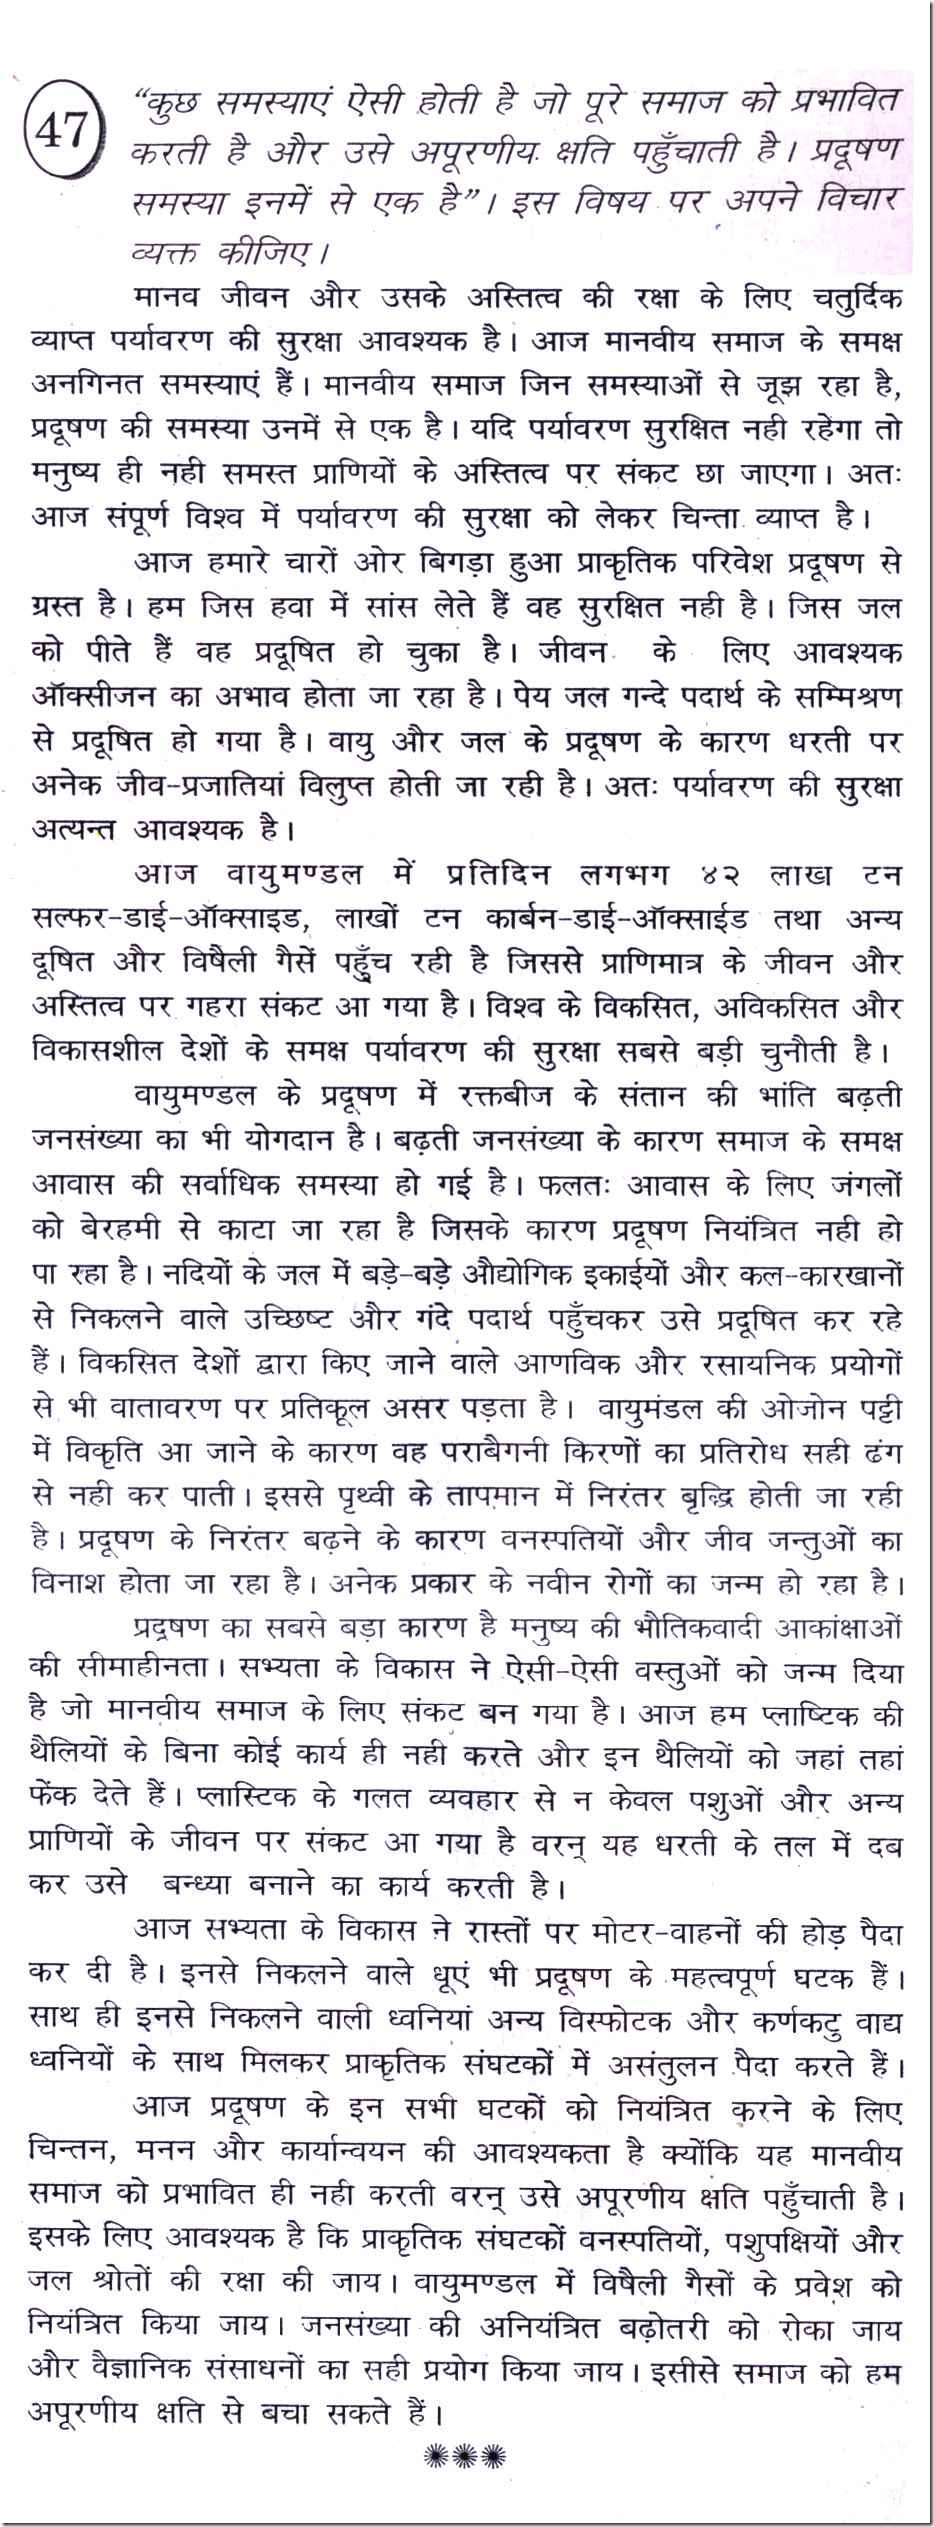 Essay on the “Importance of Nature” in Hindi